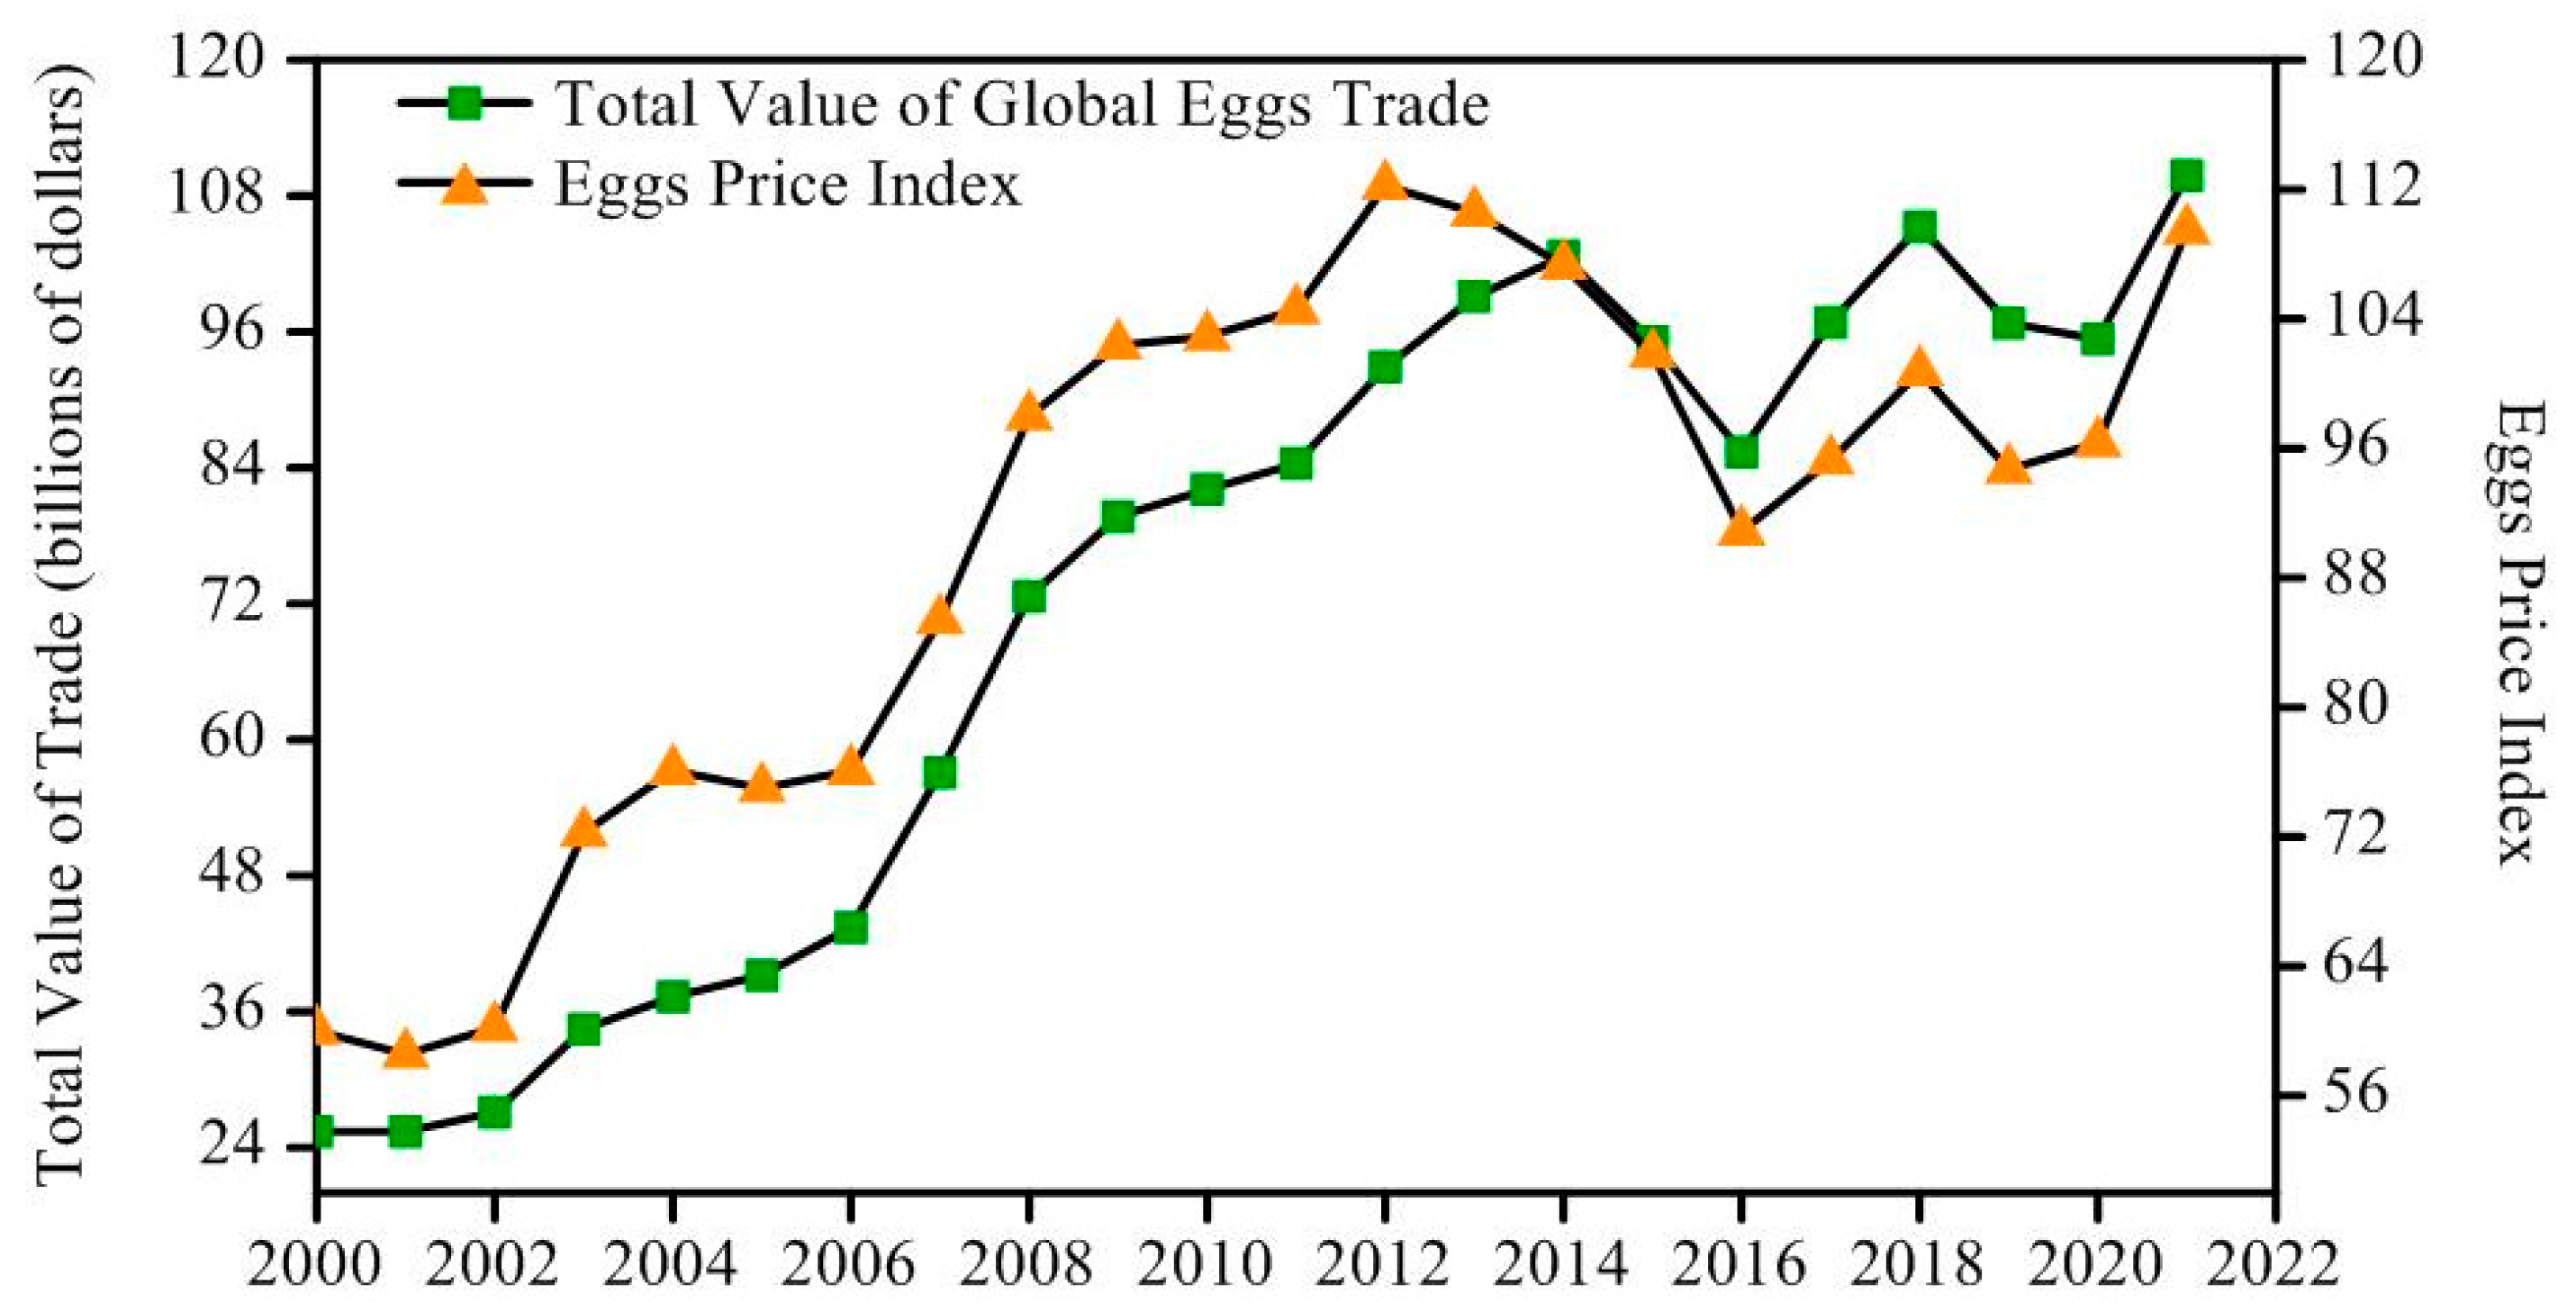 LV also prices the United States , France and Italy, 2010-2012 price  comparison